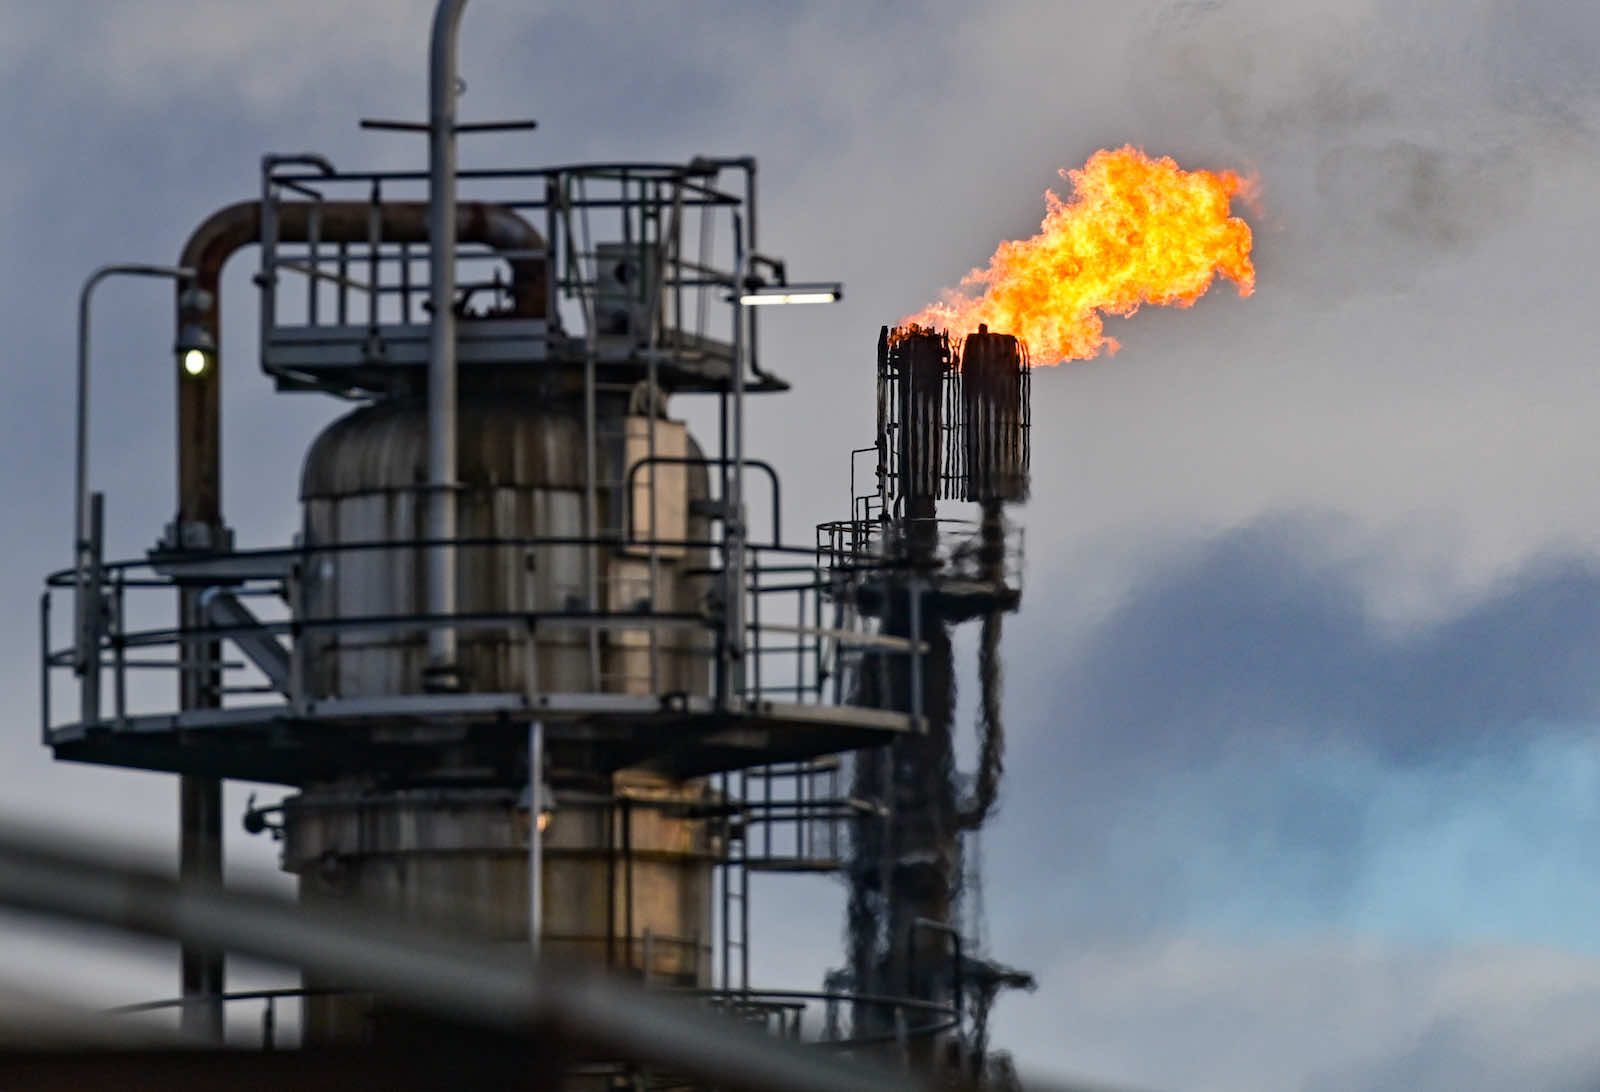 Excess gas is burned at an oil refinery in Brandenburg, part of the “Friendship” pipeline from Russia to Germany (Patrick Pleul via Getty Images)